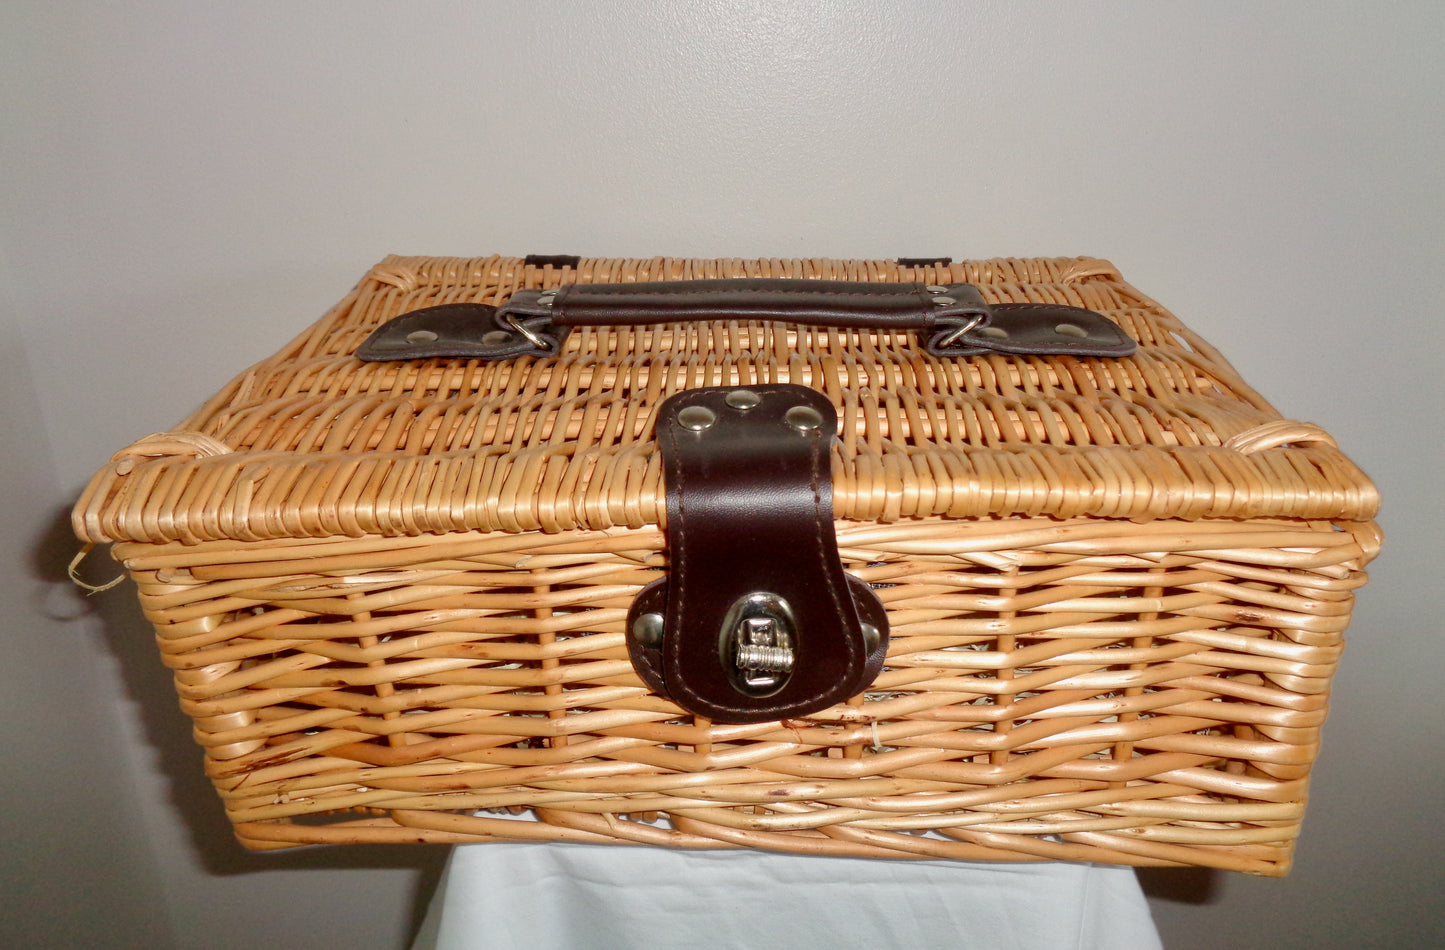 Small Wicker Picnic Basket With Brown Leather Handle and Twist Clasp